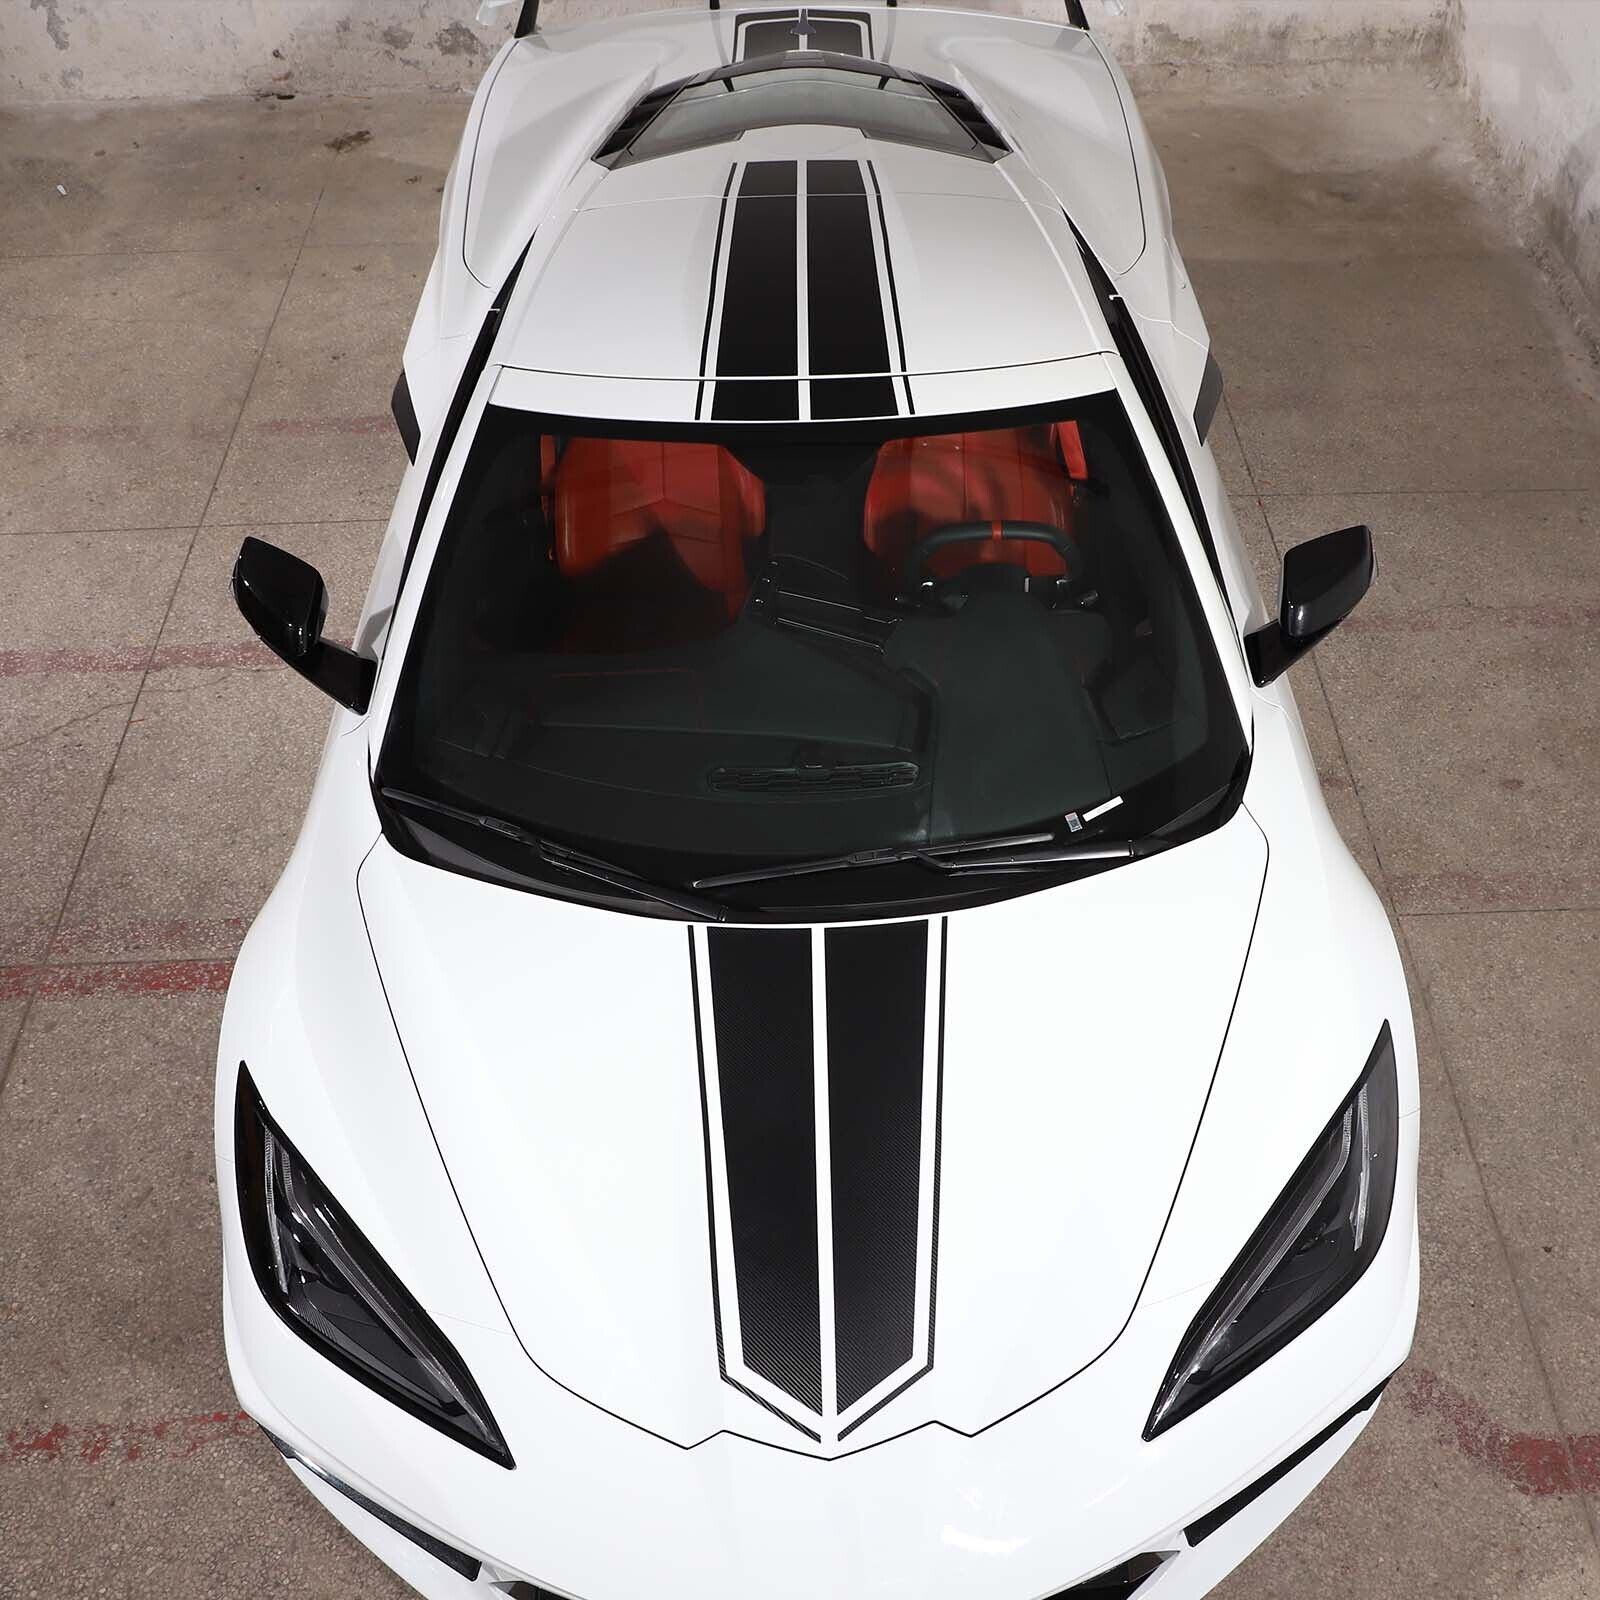 Roof Racing Stripes Overlay Graphic Decal Flat Vinyl Fit For Corvette C8 2020-23